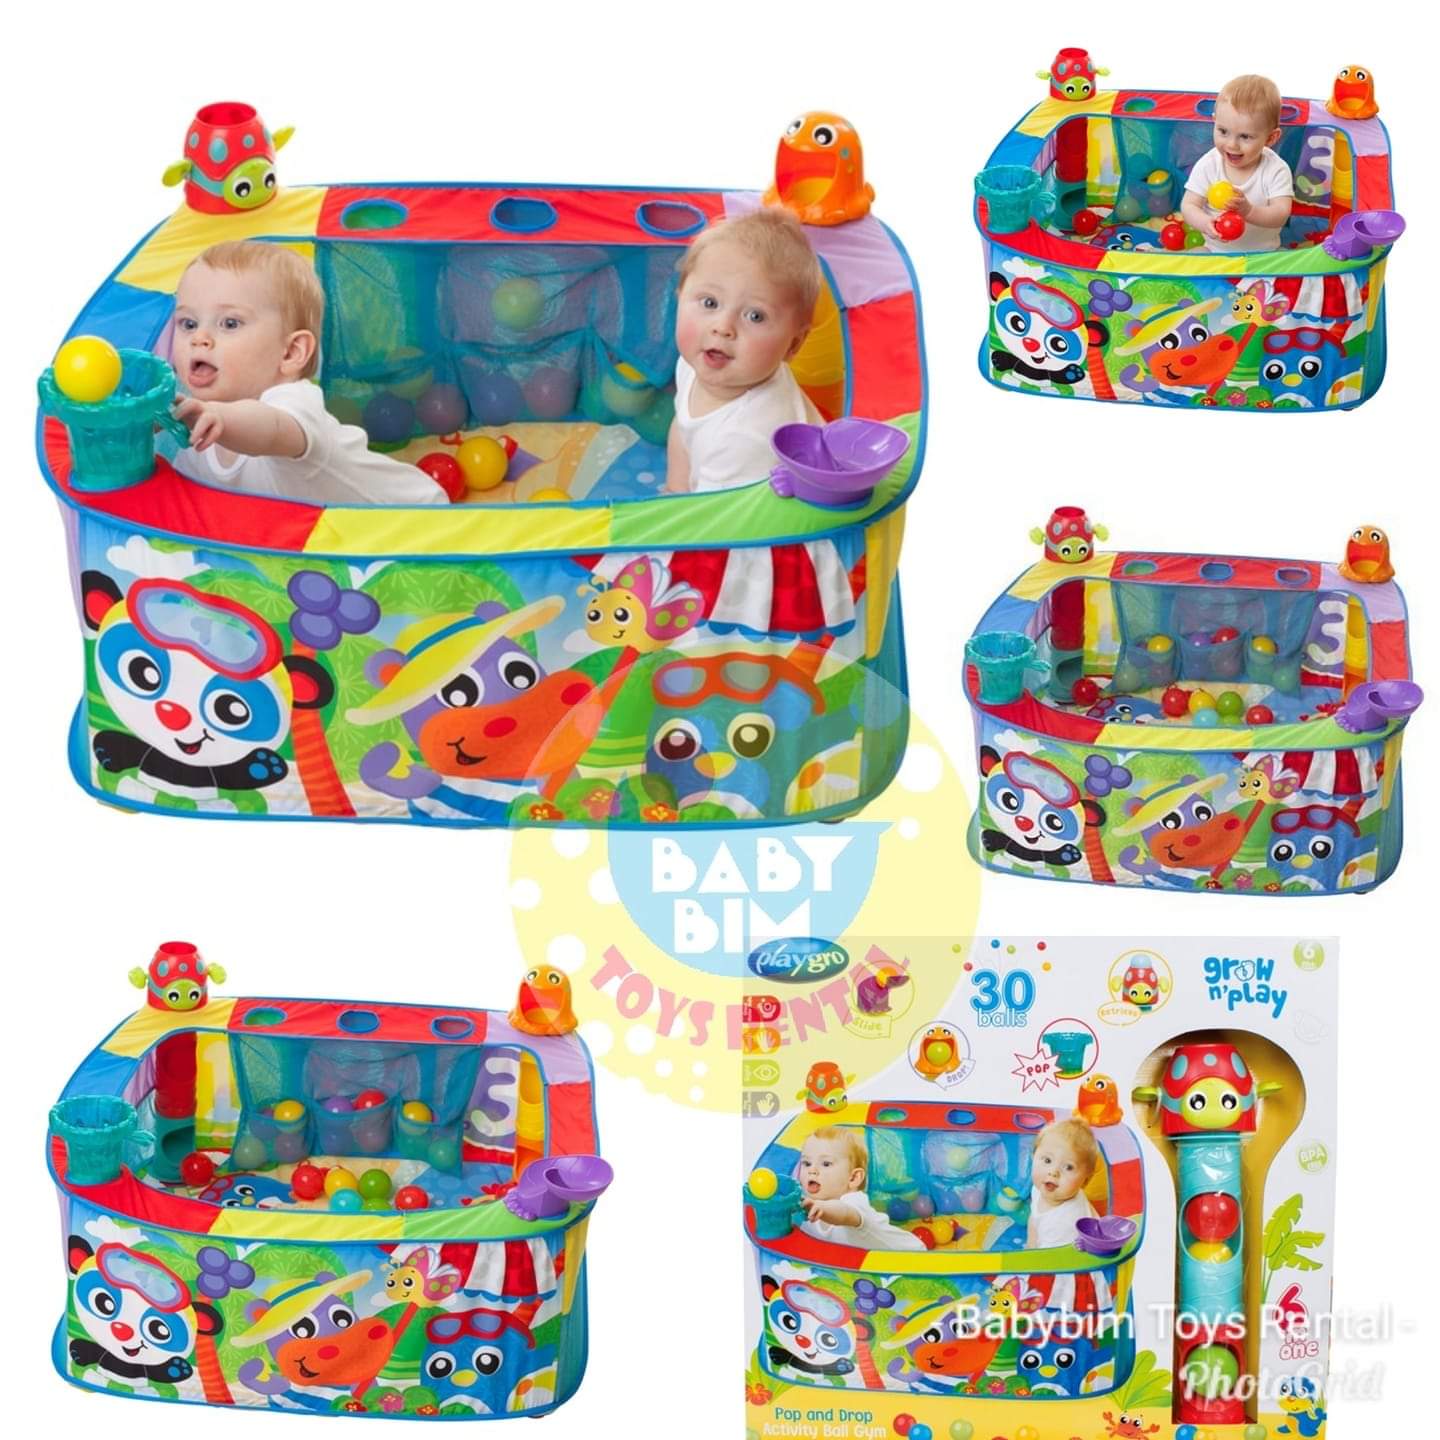 POP AND DROP ACTIVITY BALL GYM